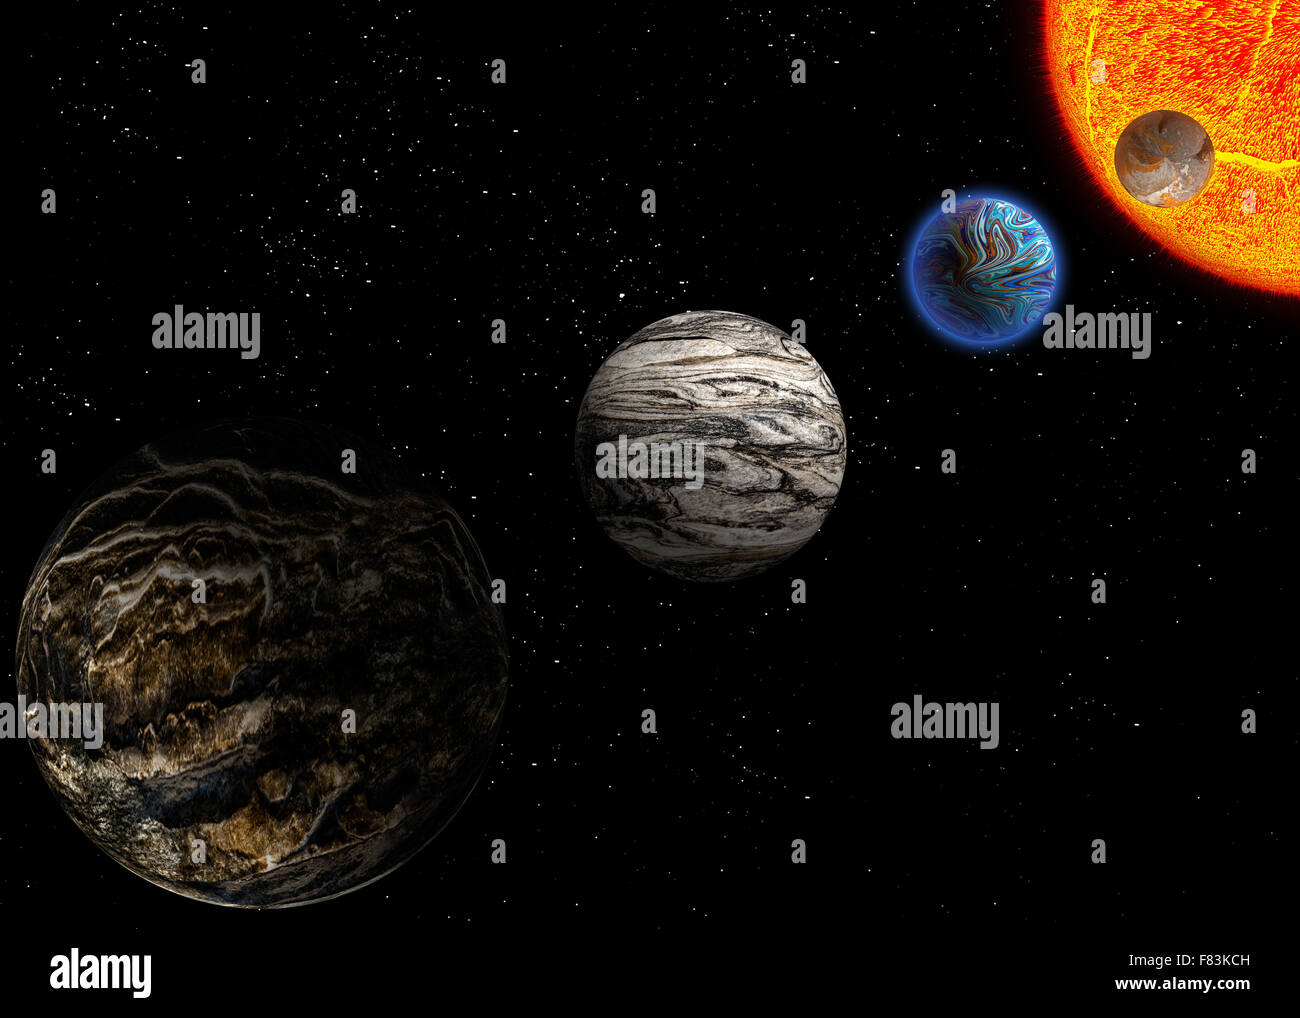 Illustration of a alien planets. Stock Photo